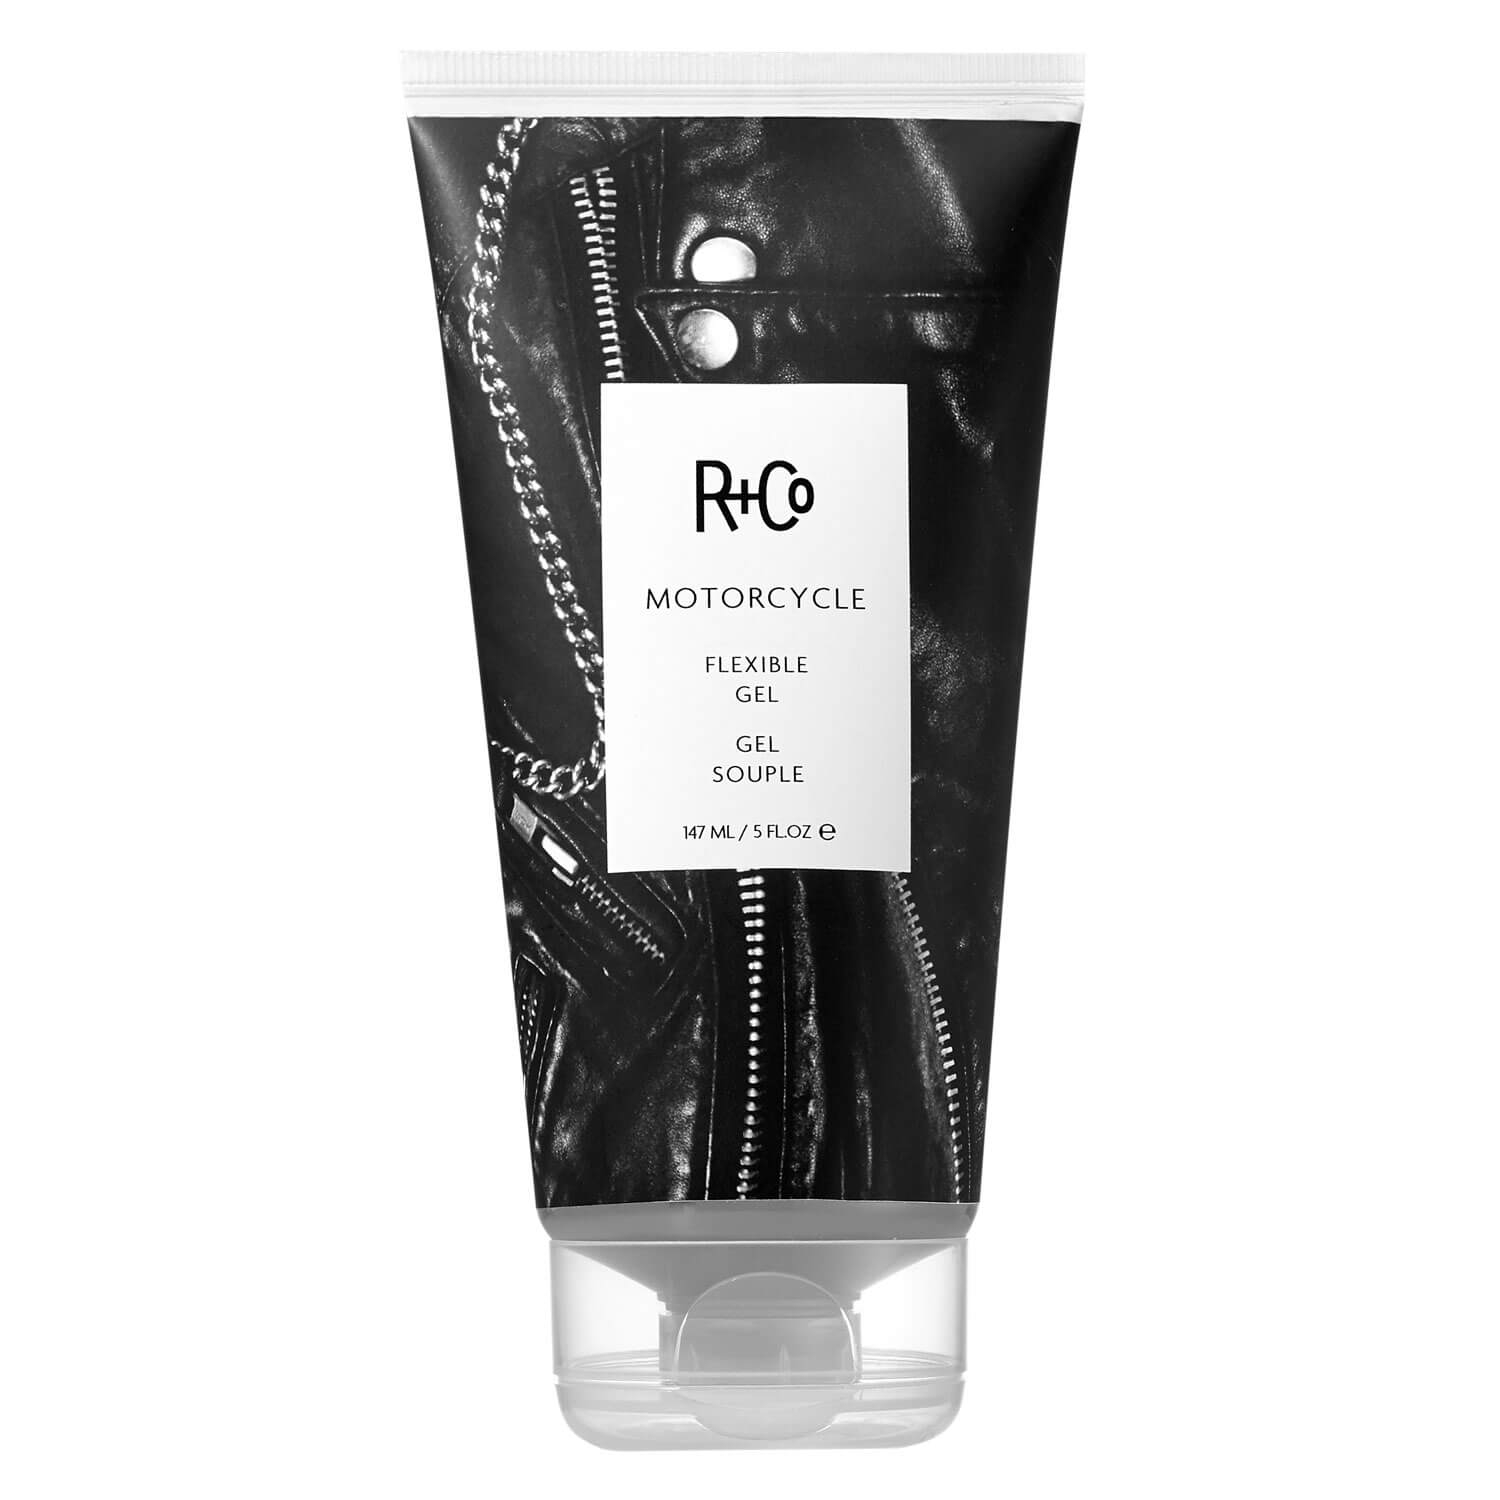 Product image from R+Co - Motorcycle Flexible Gel